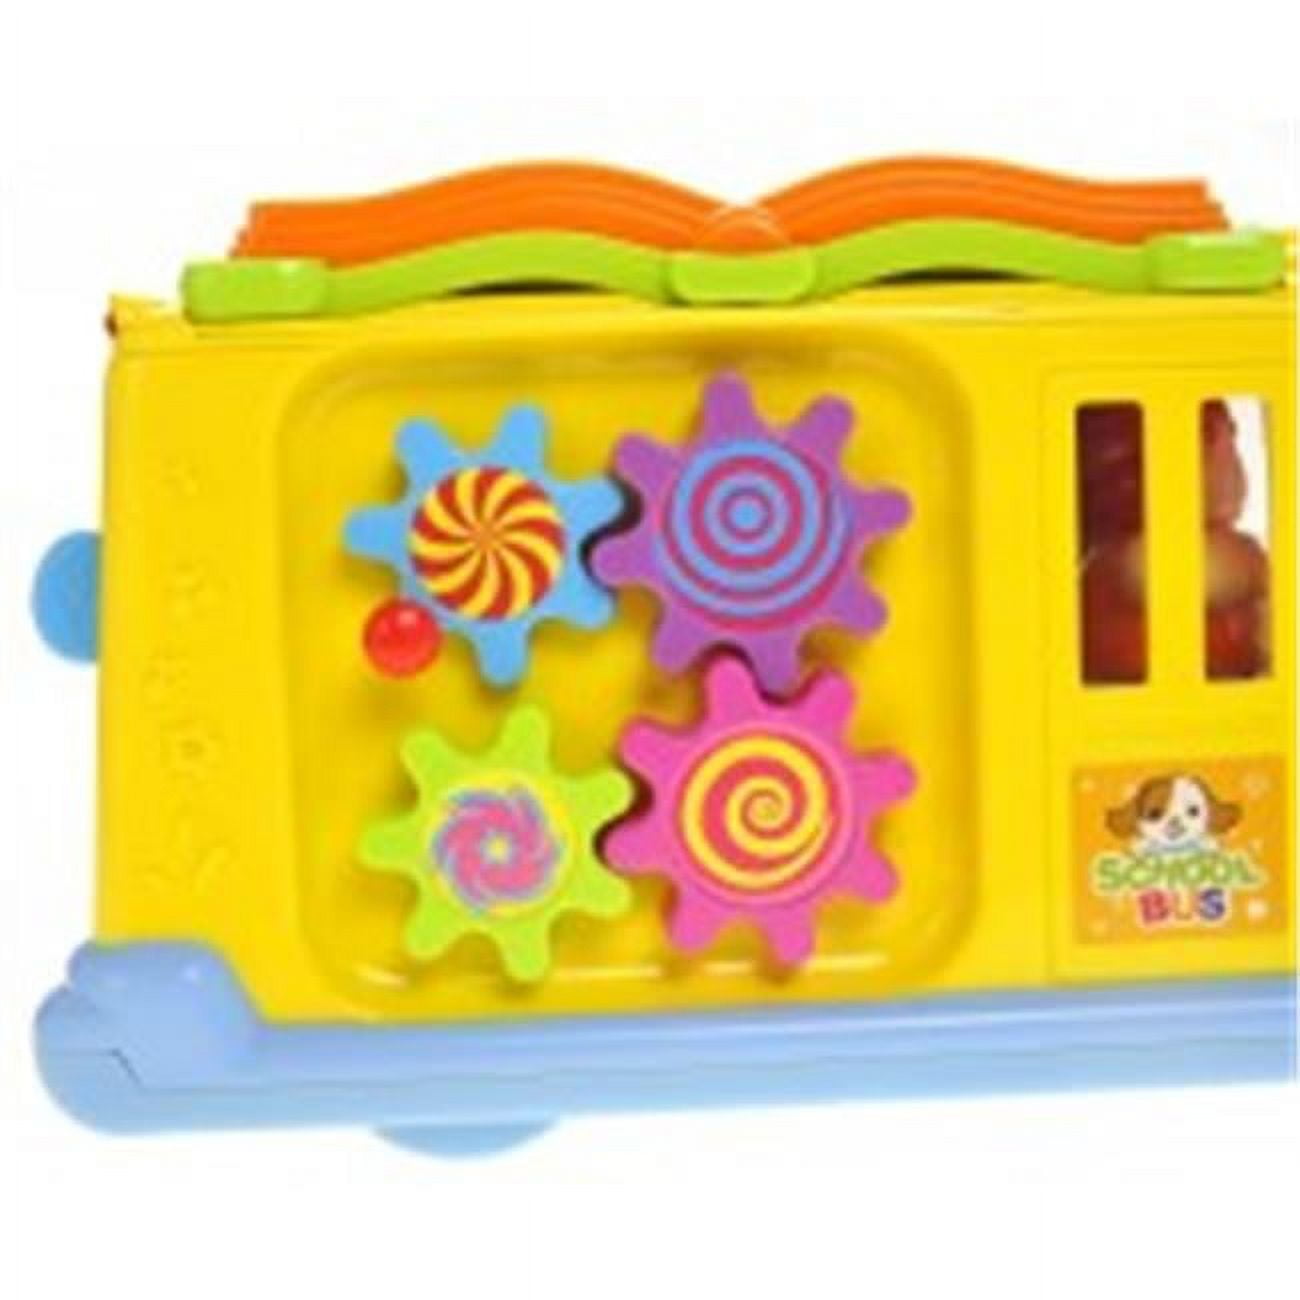 Ps796 Interactive School Bus Toy With Flashing Lights & Sounds